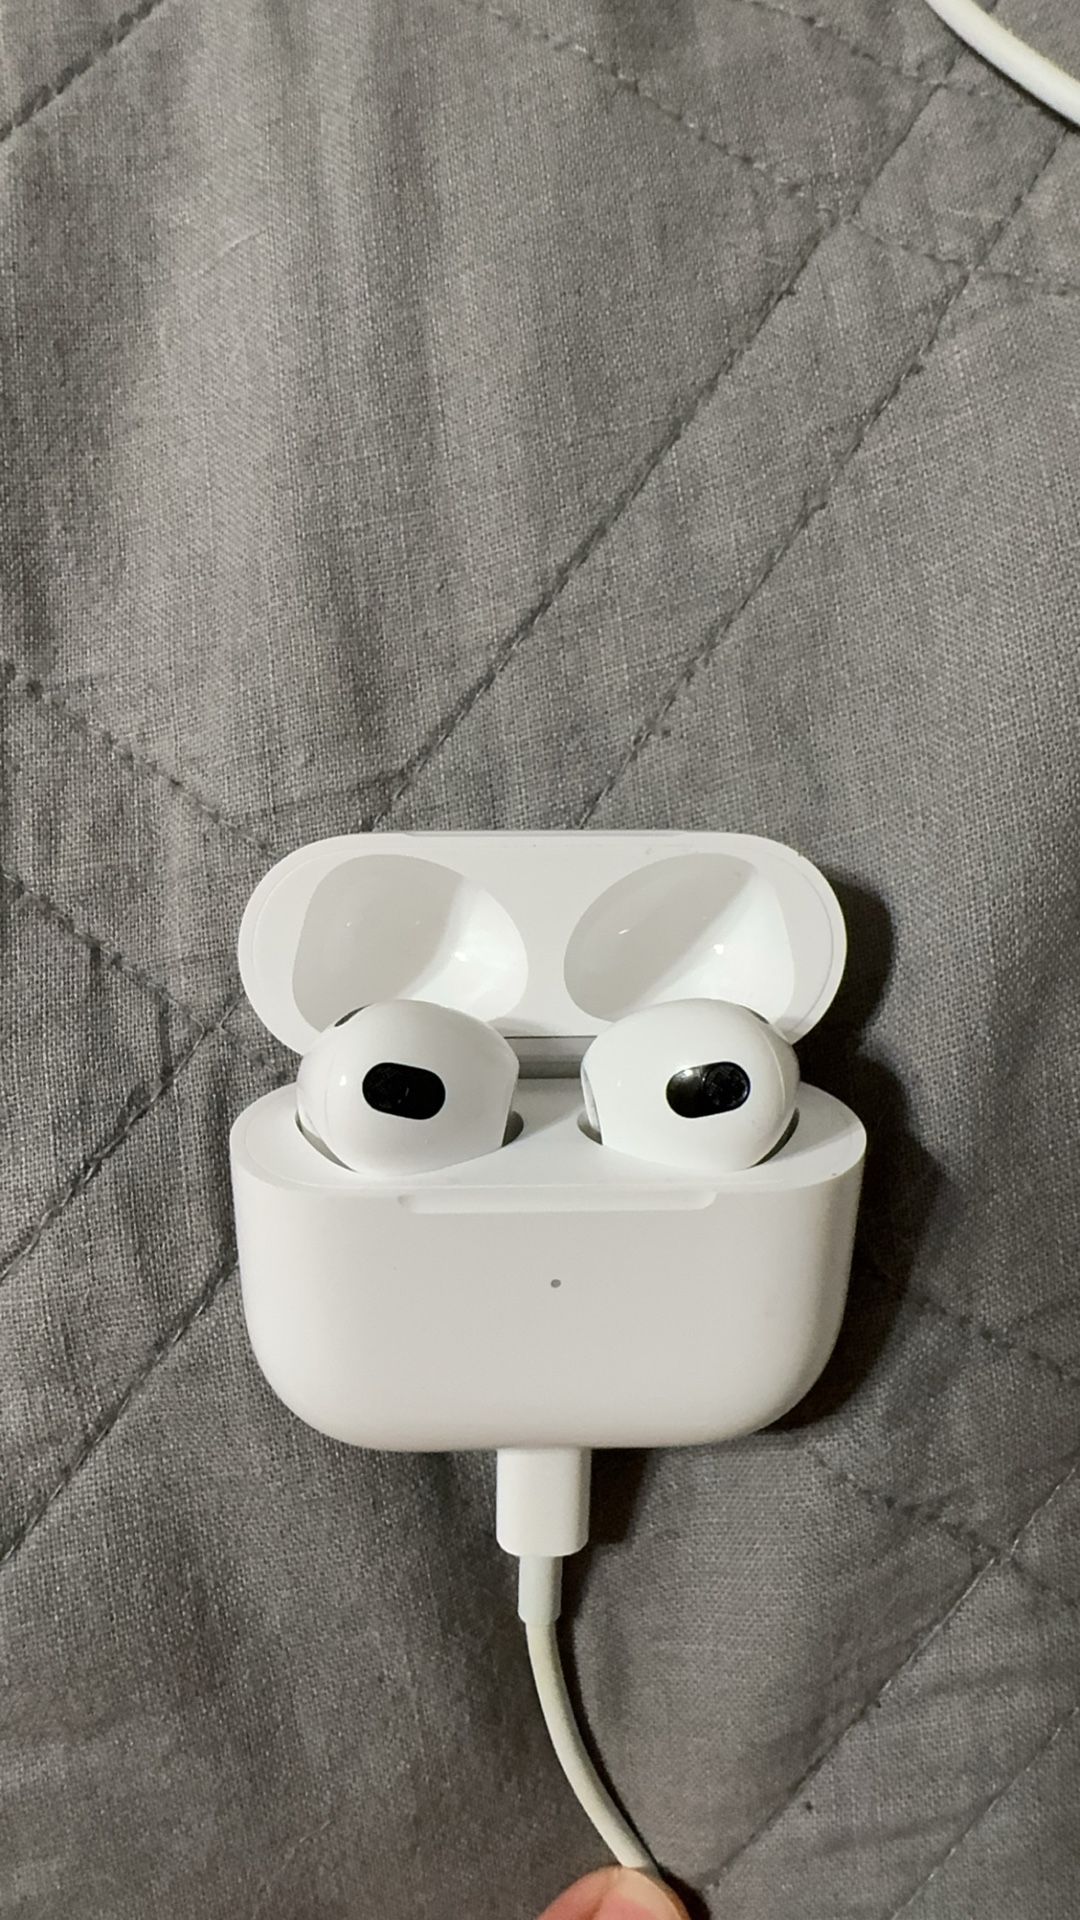 Apple AirPods (3rd generation) 